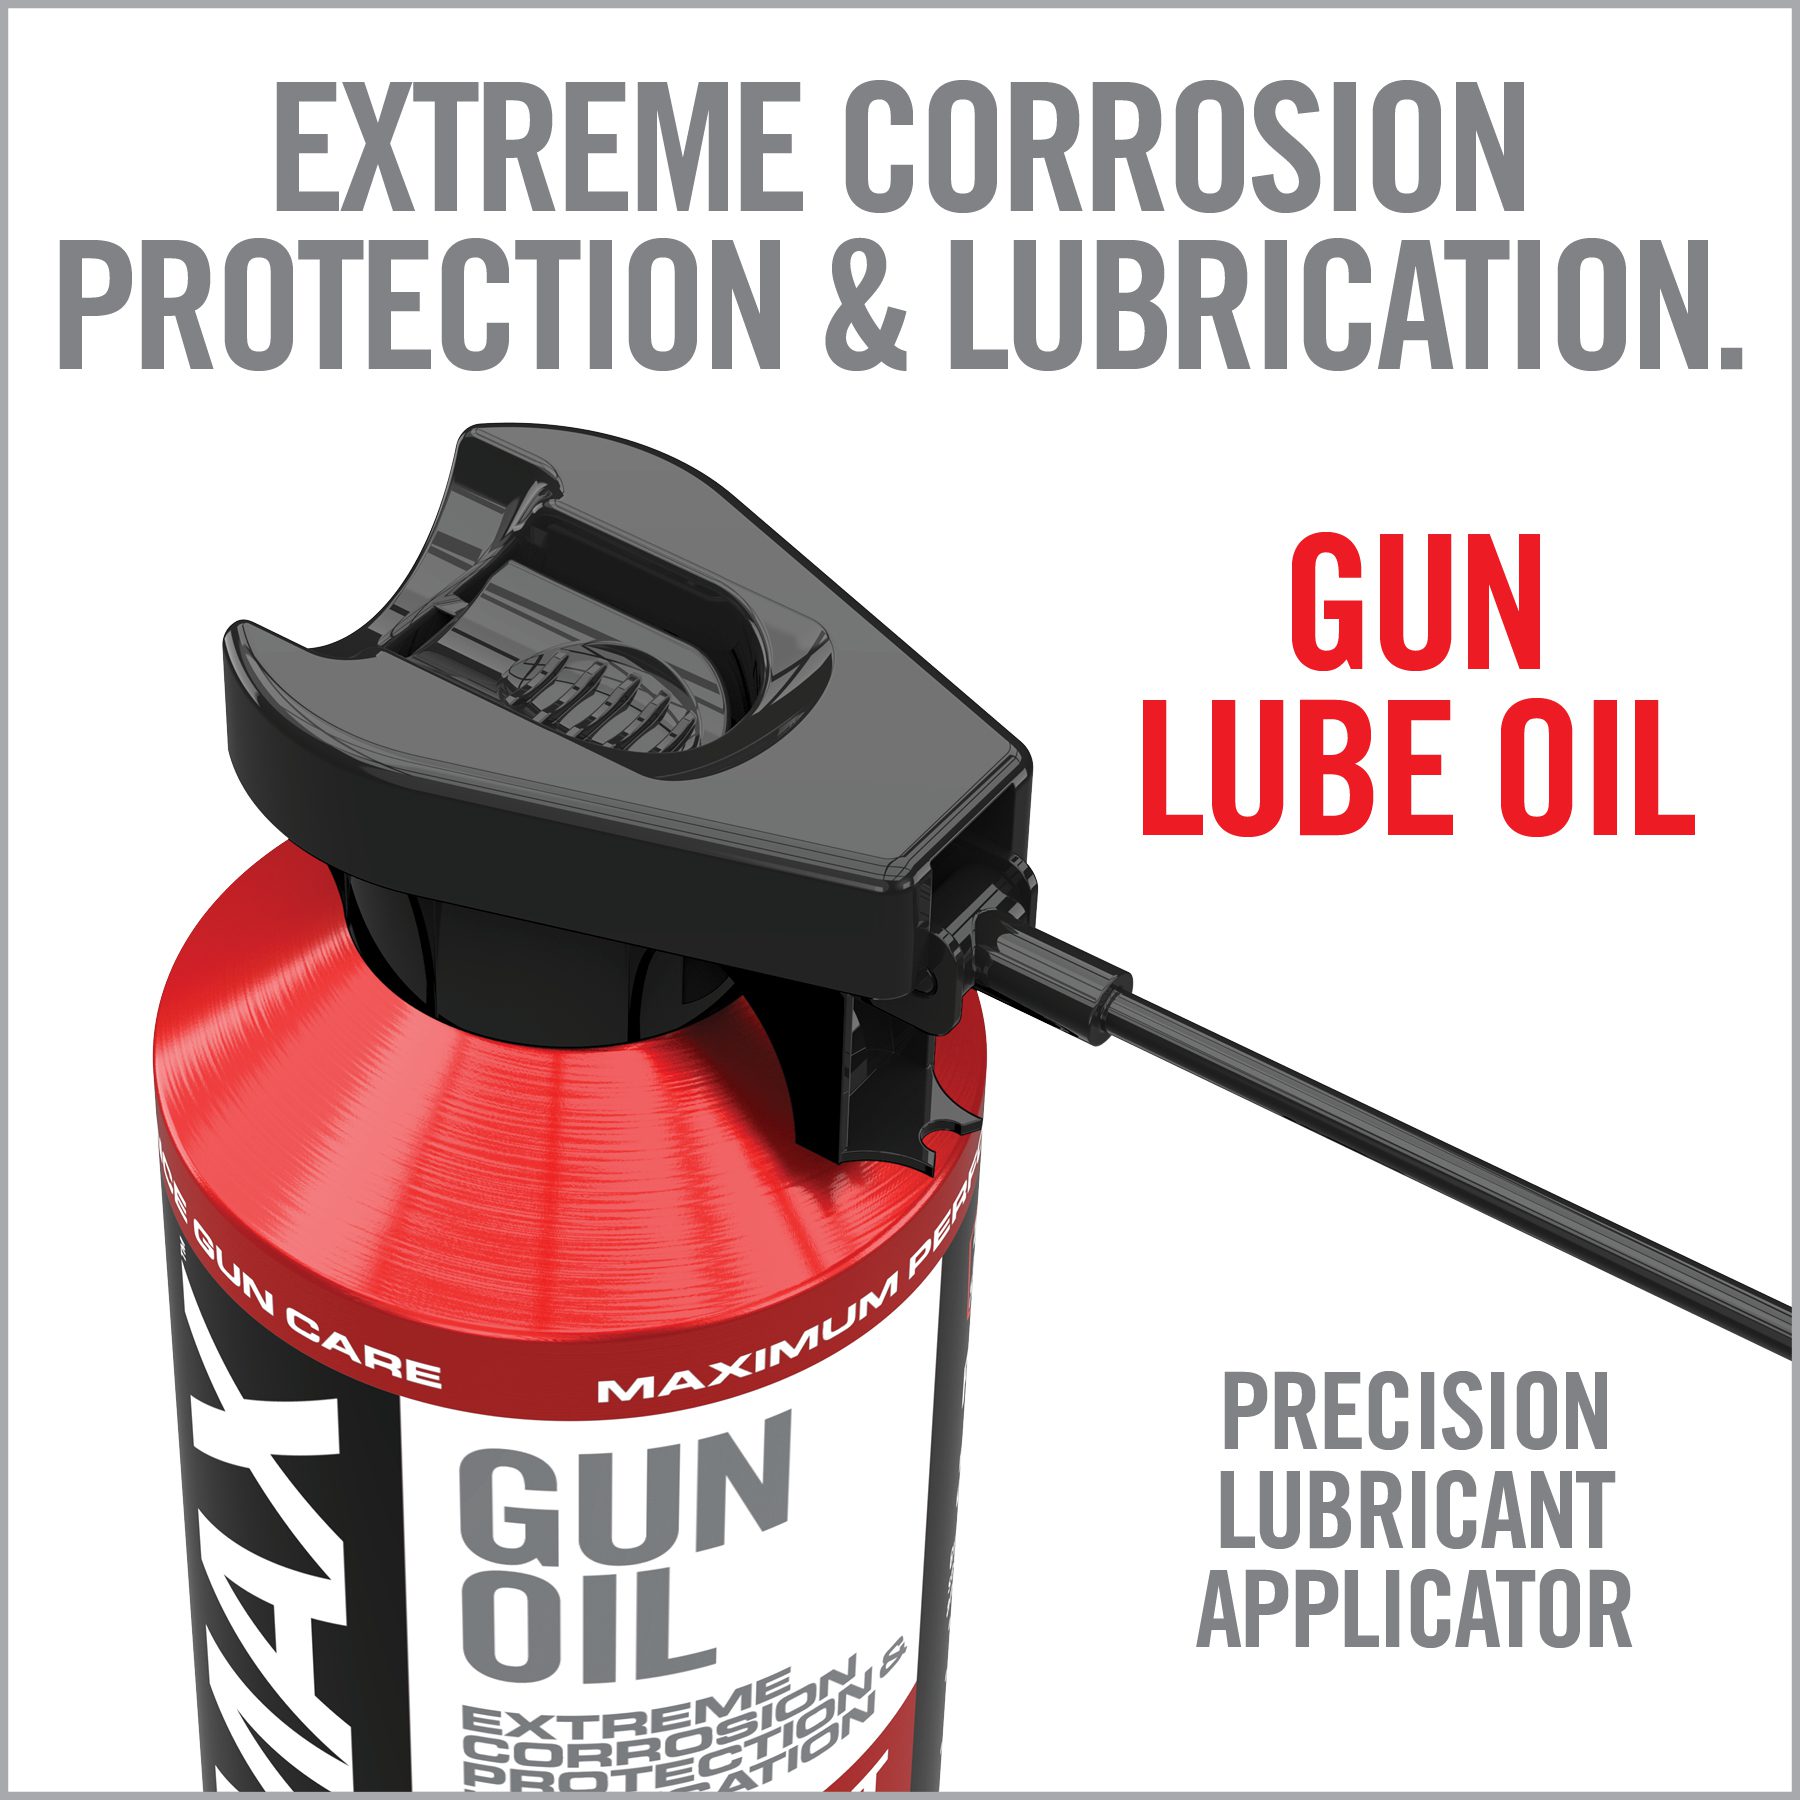 a gun lube oil advertisement with an extree and lubrication